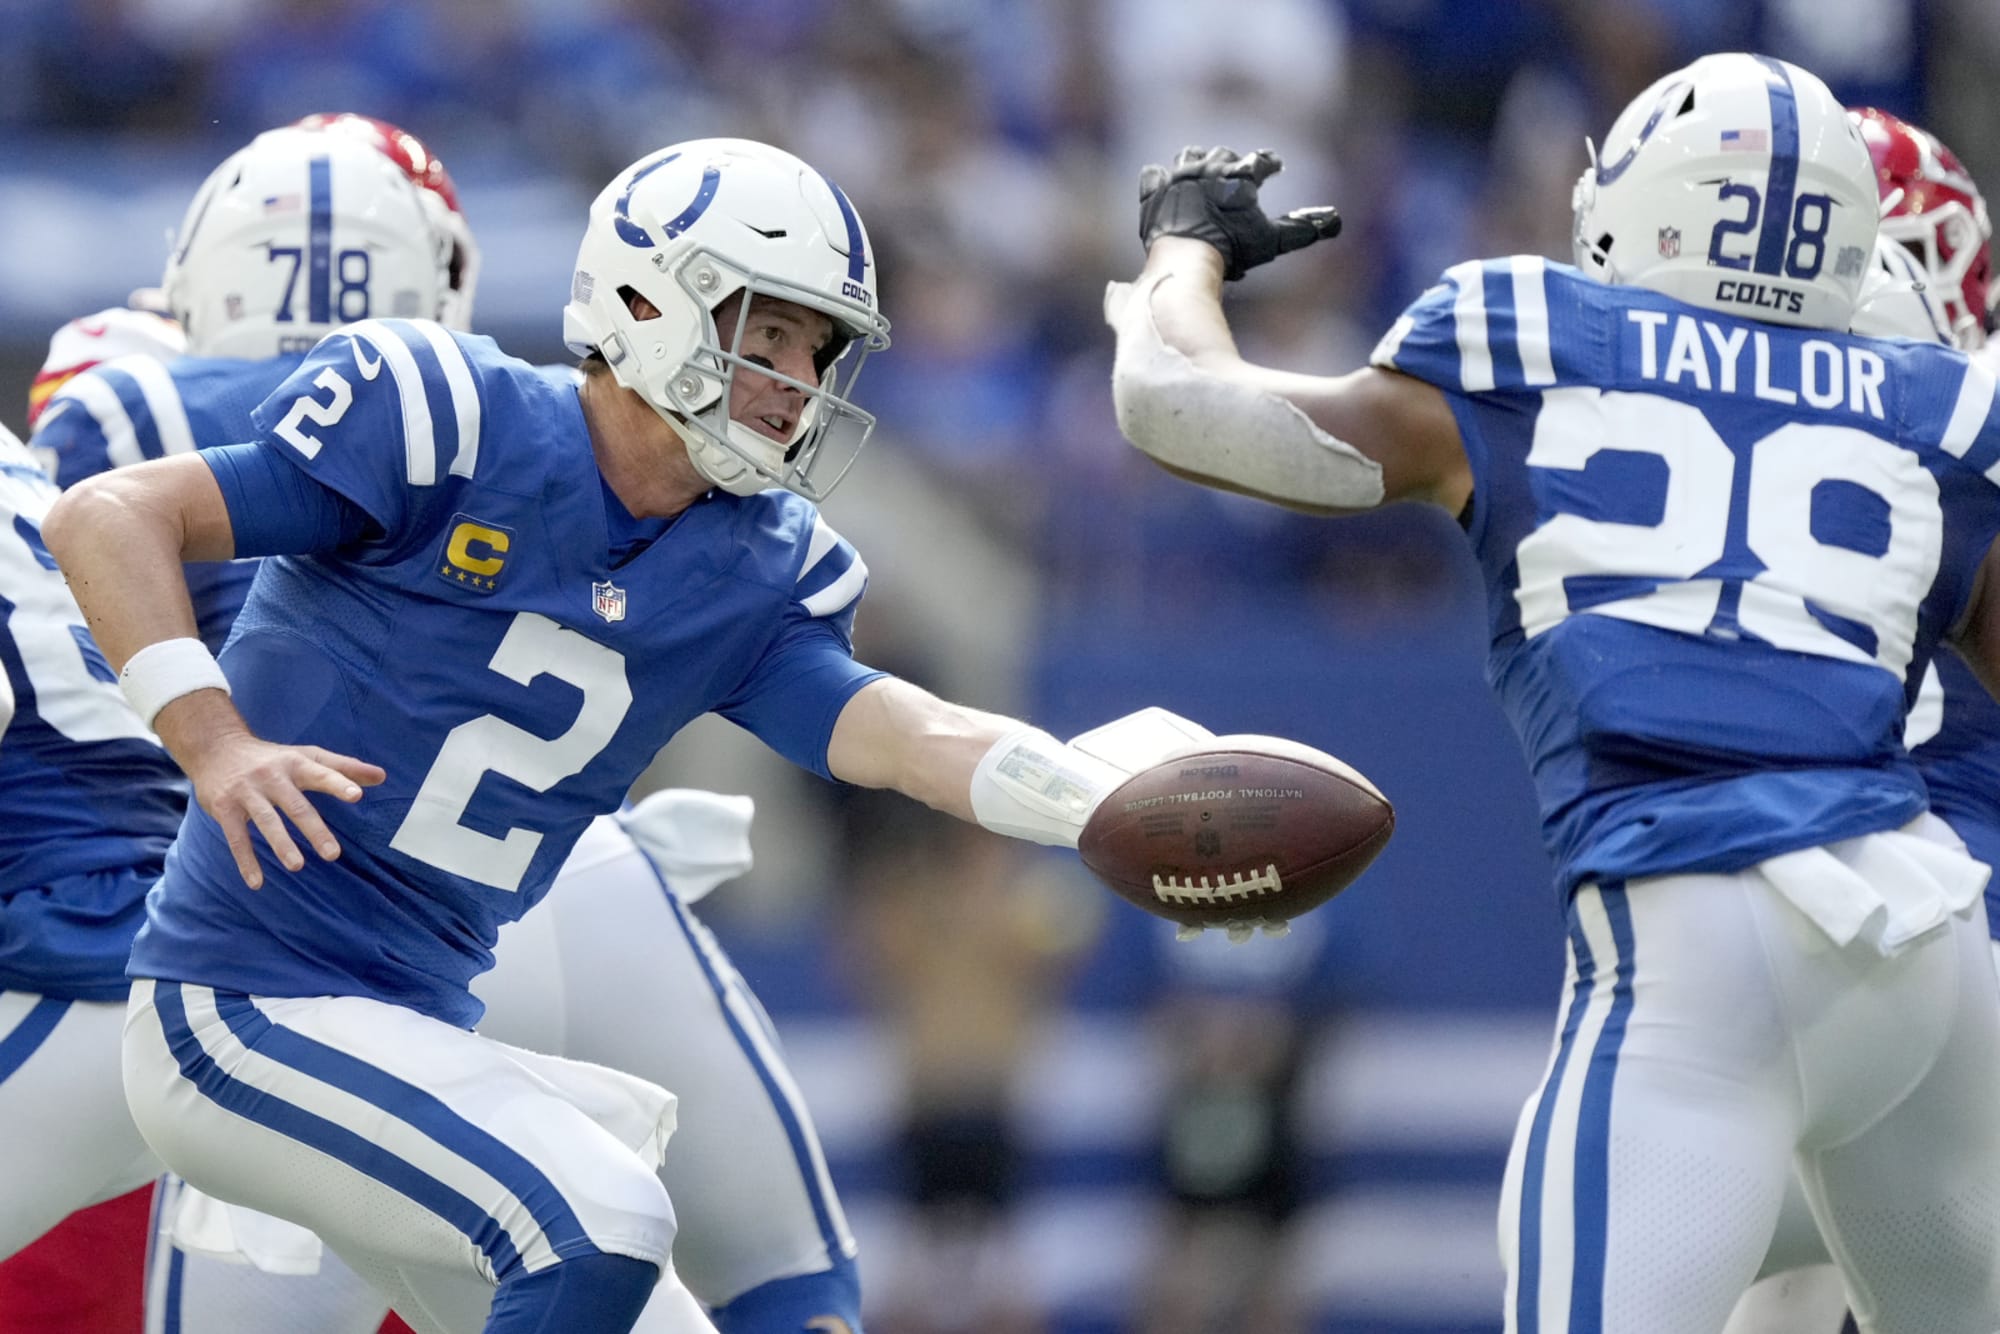 What can the Colts do to improve their offense?